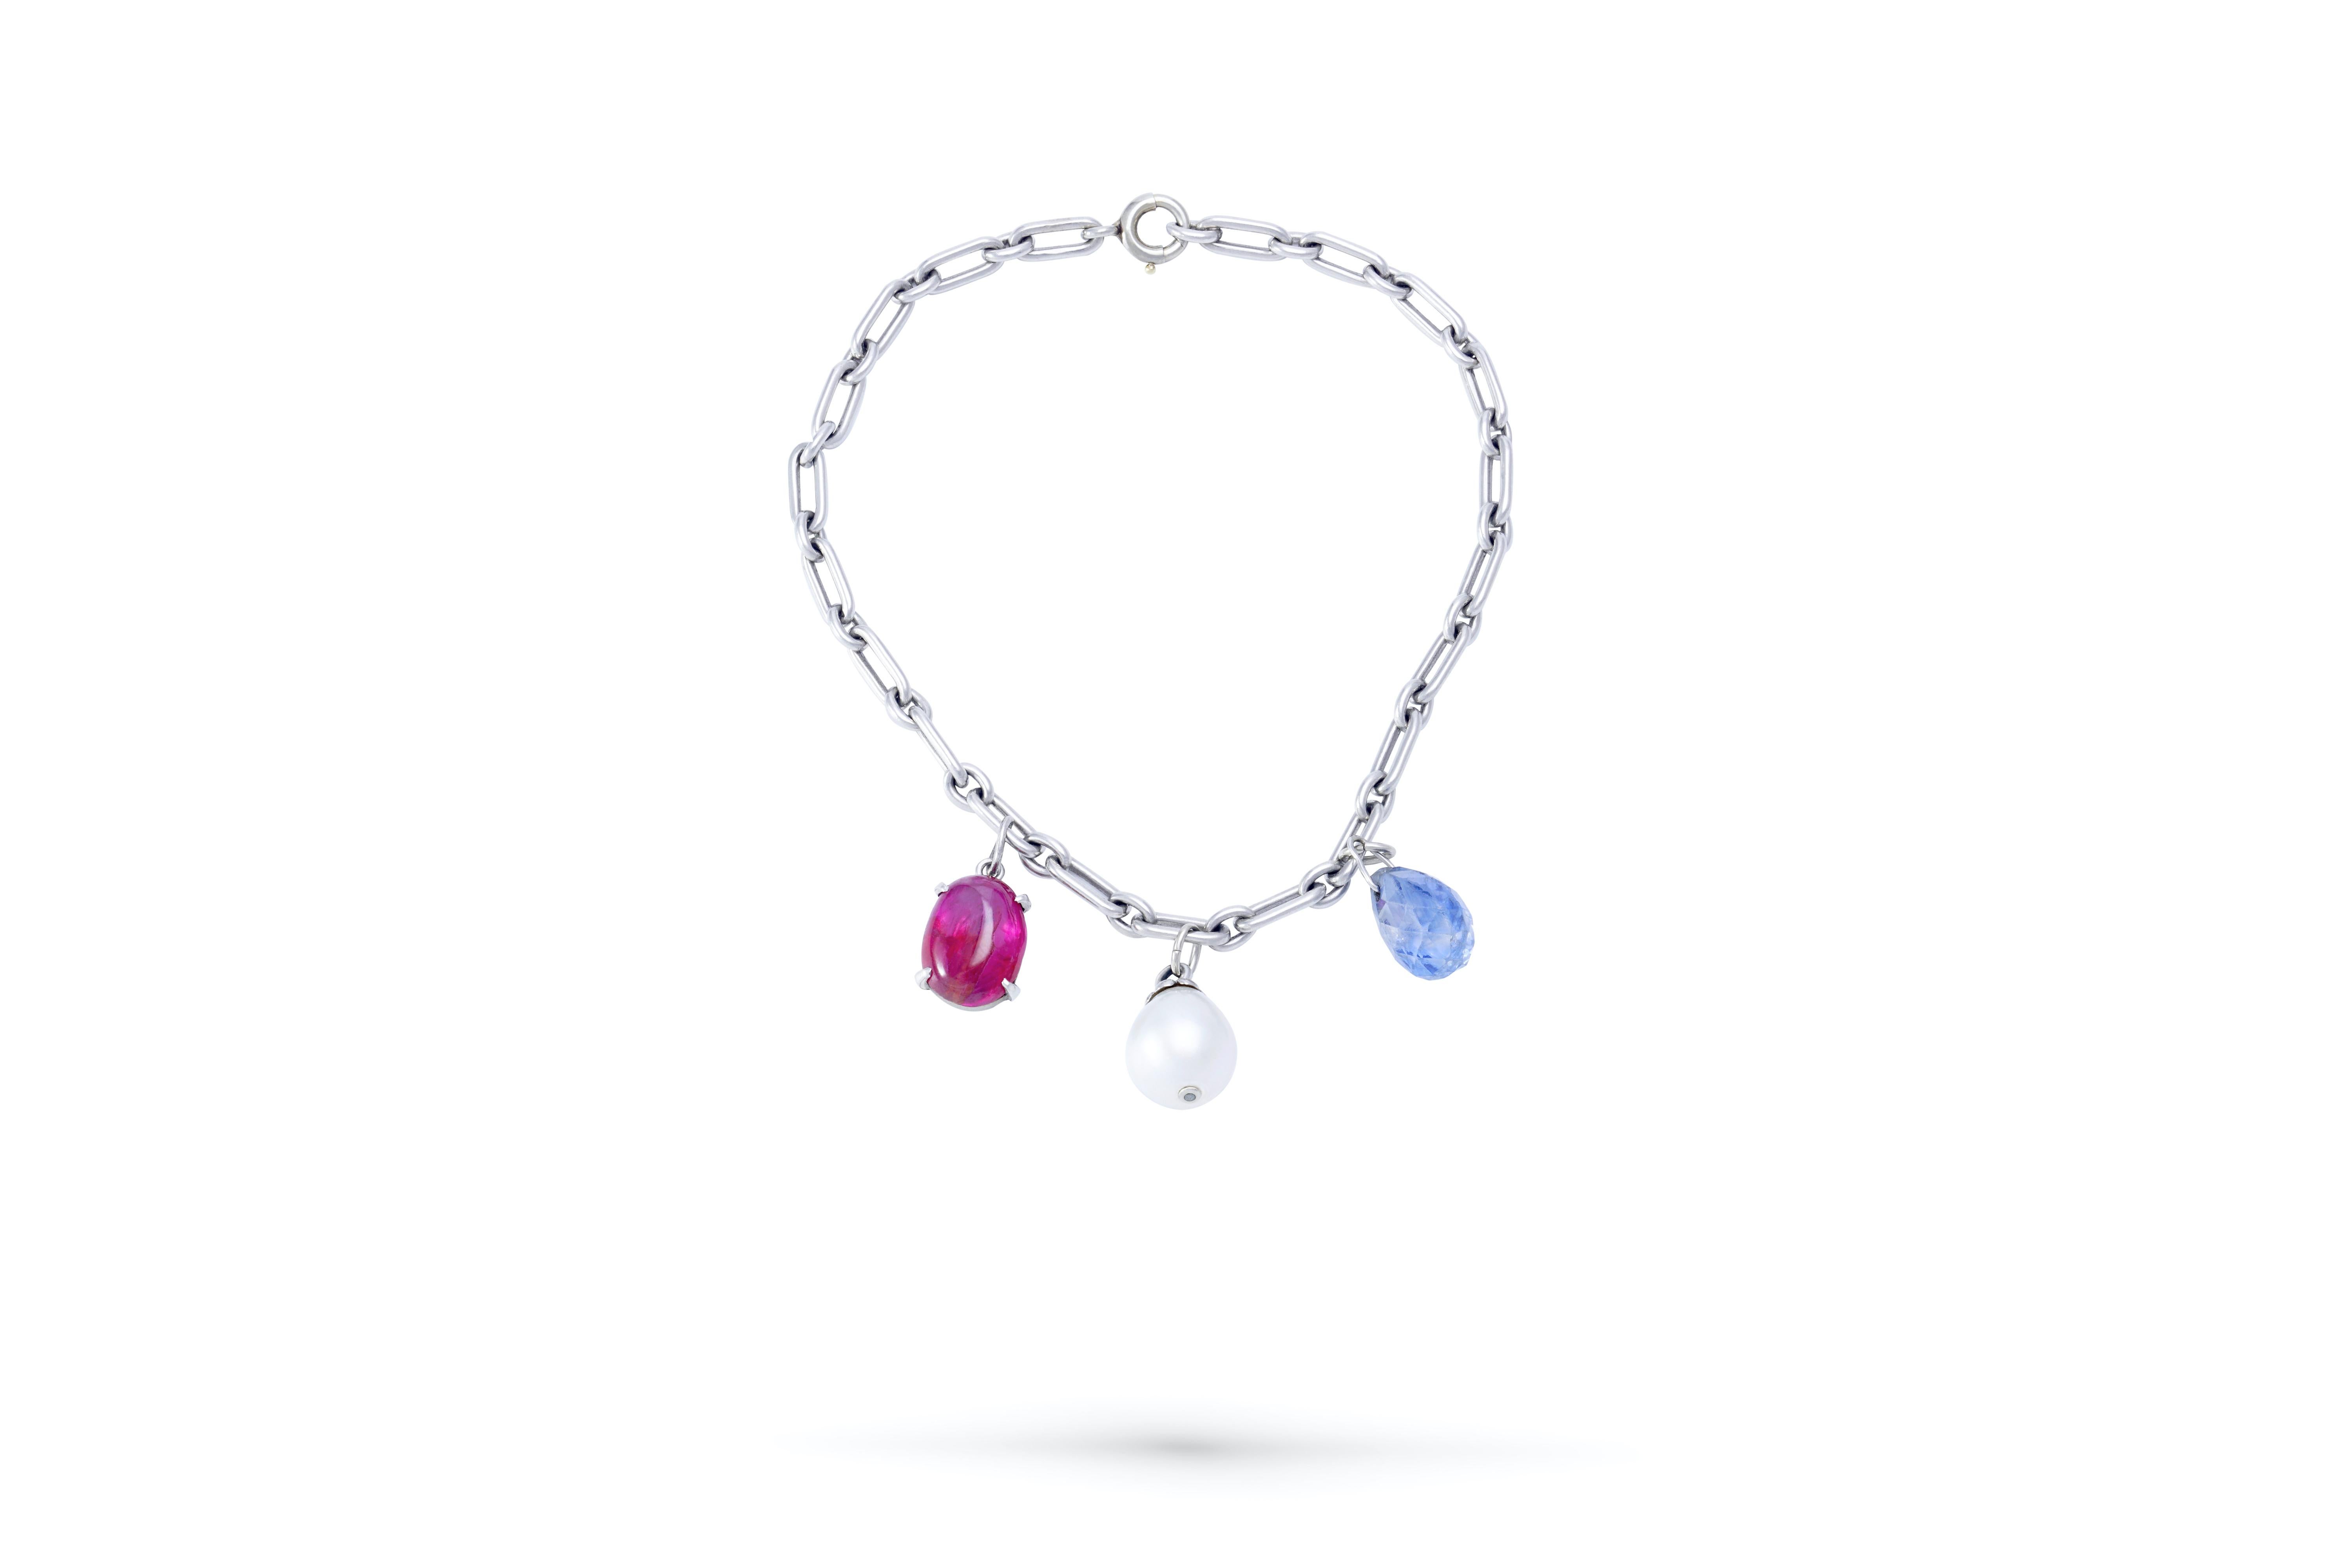 RENE BOIVIN Bracelet in platinum holding : 
- one 5,31 carats KashmirNo heat sapphire (Certificate)
- one Burma Ruby No heat (Certificate)
- one pearl. 
Made in 1945 by René Boivin to celebrate the end of the second Word War. Françoise Cailles